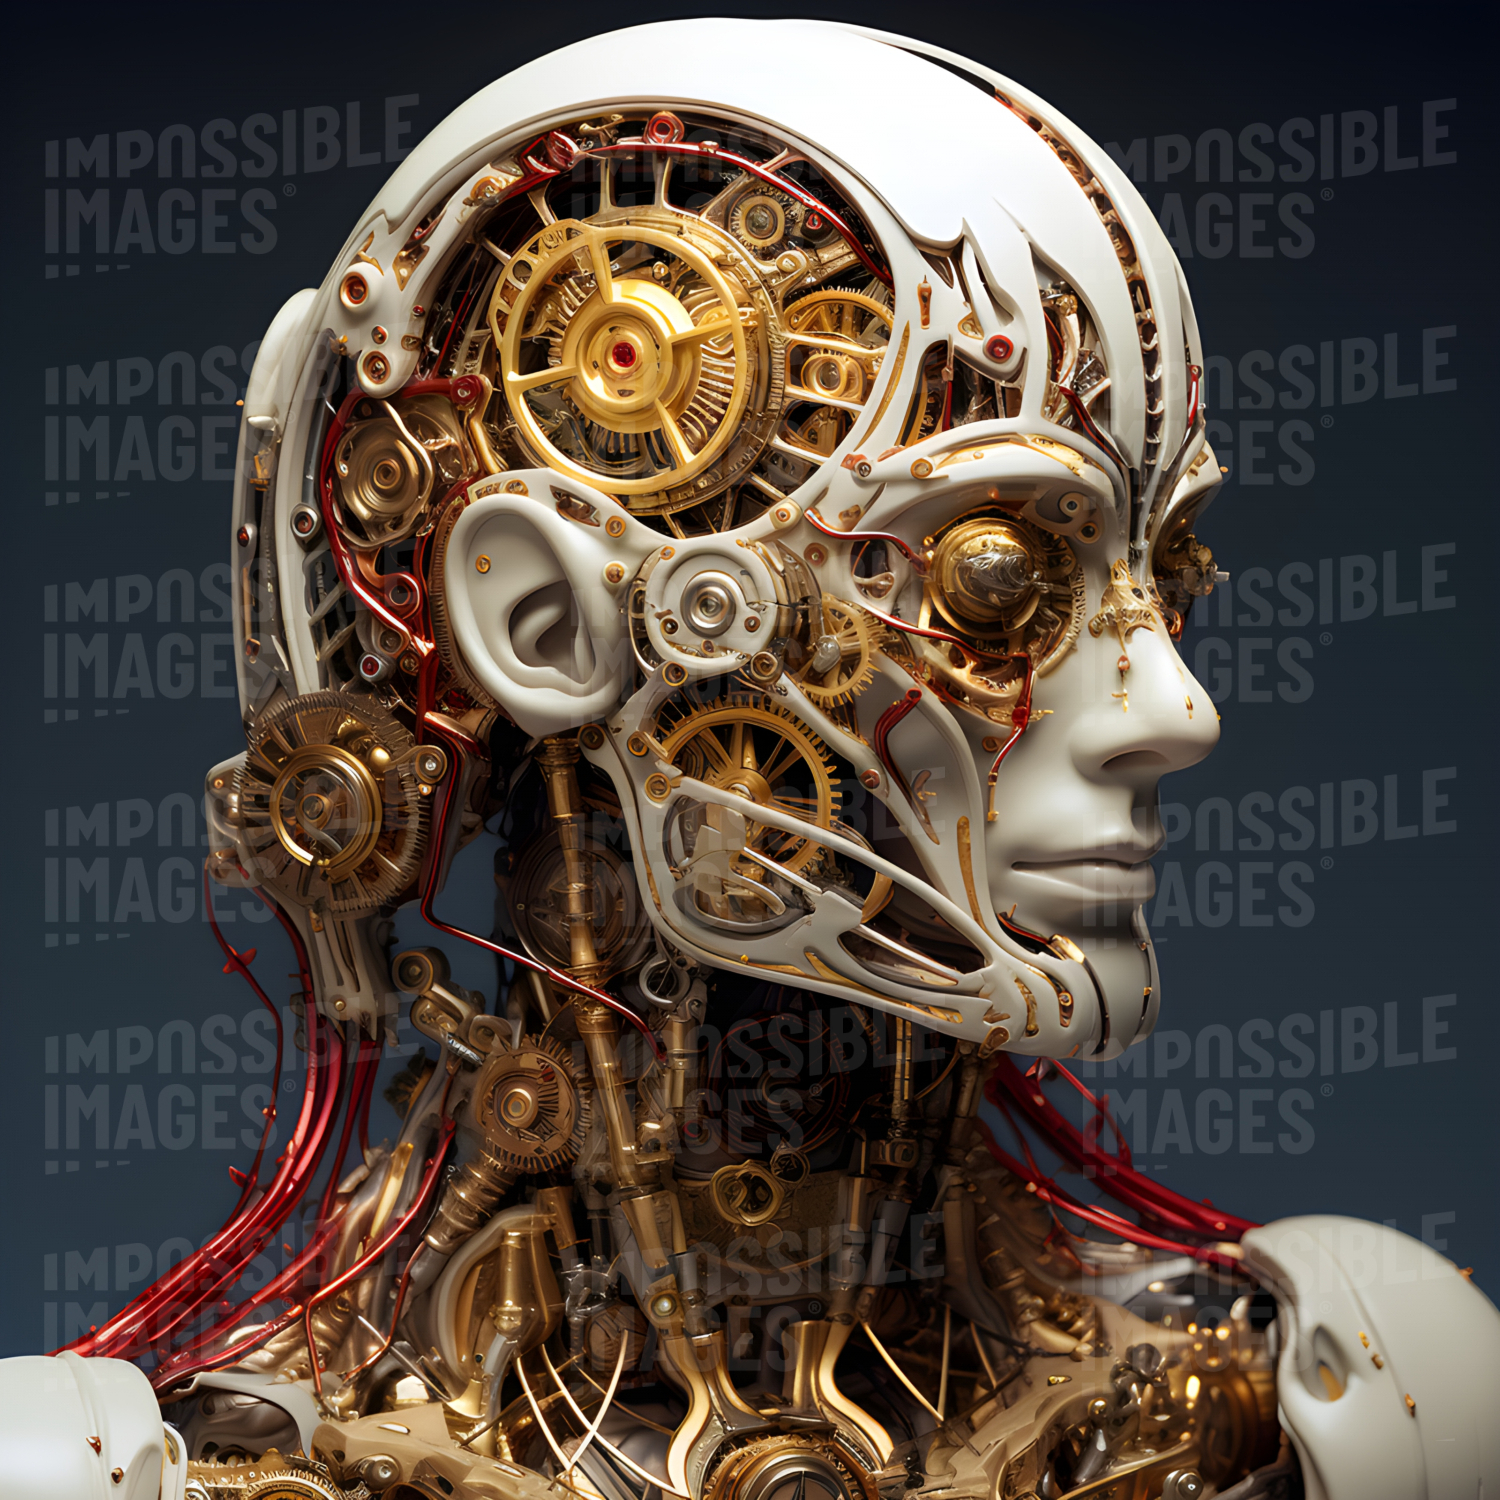 Ornate model of a stylised human head with complex clockwork inside